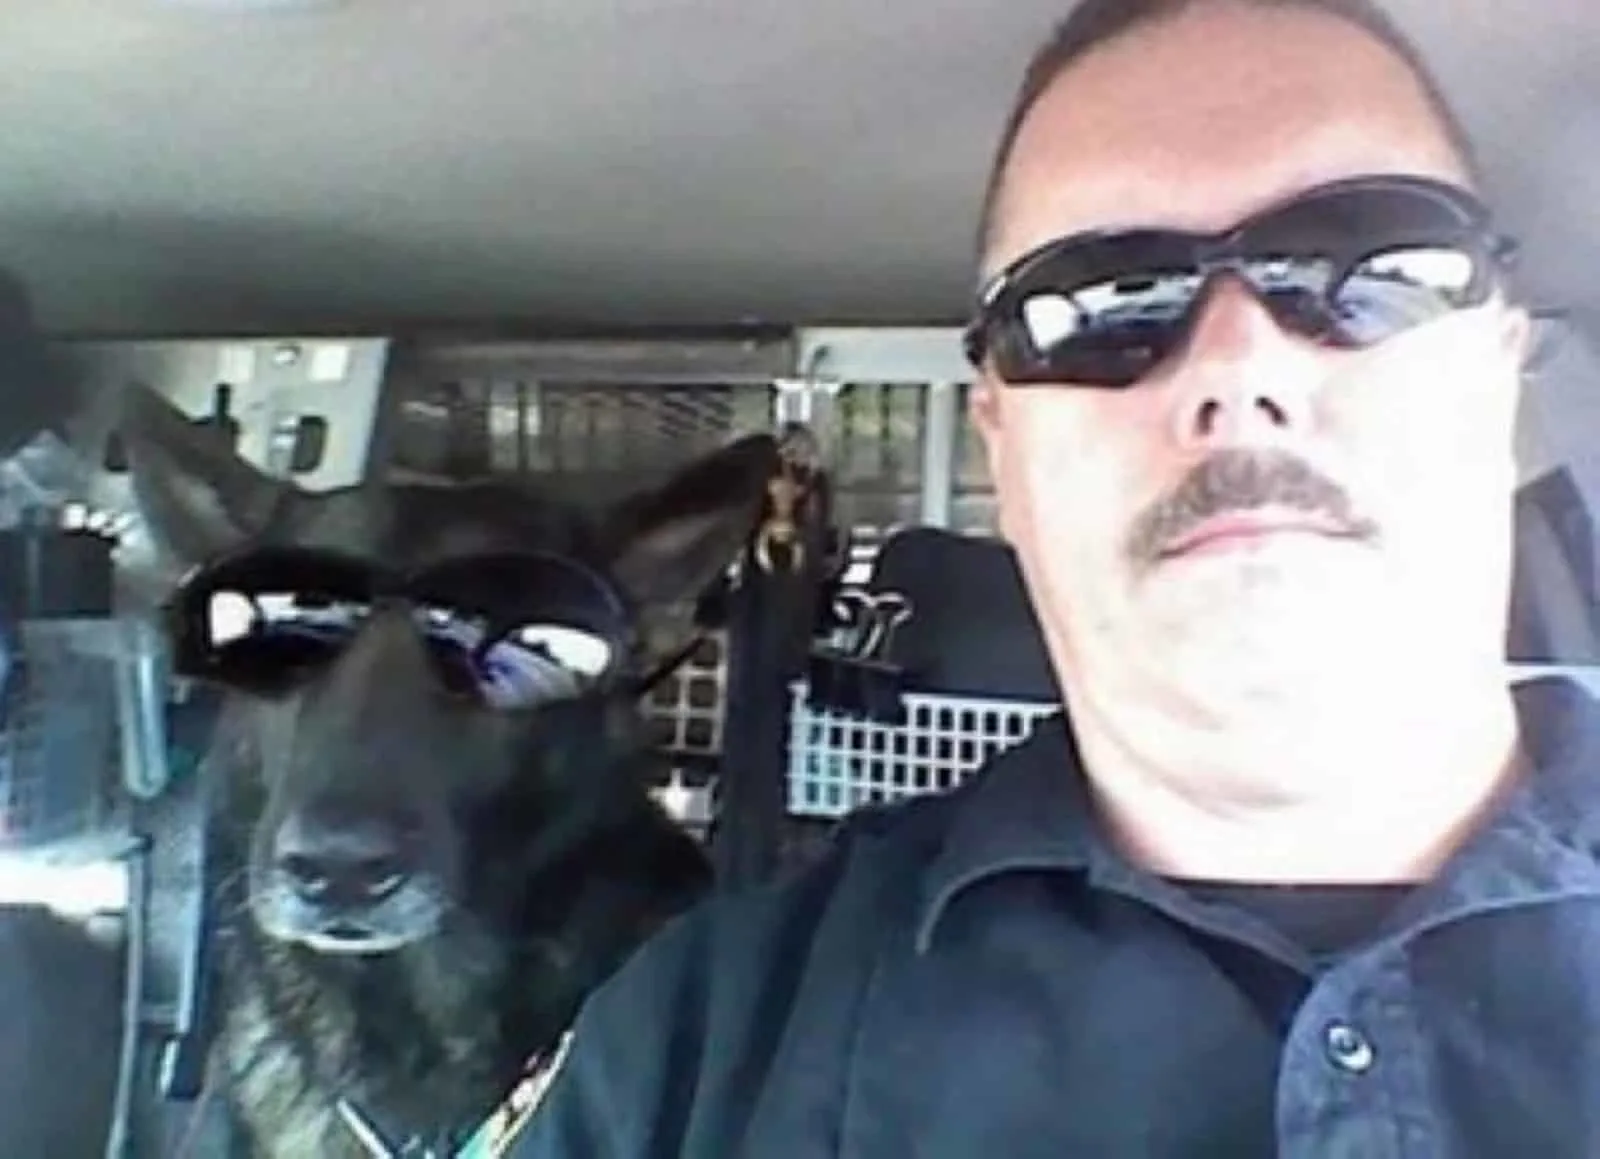 k9 officer and his dog wearing sunglasses